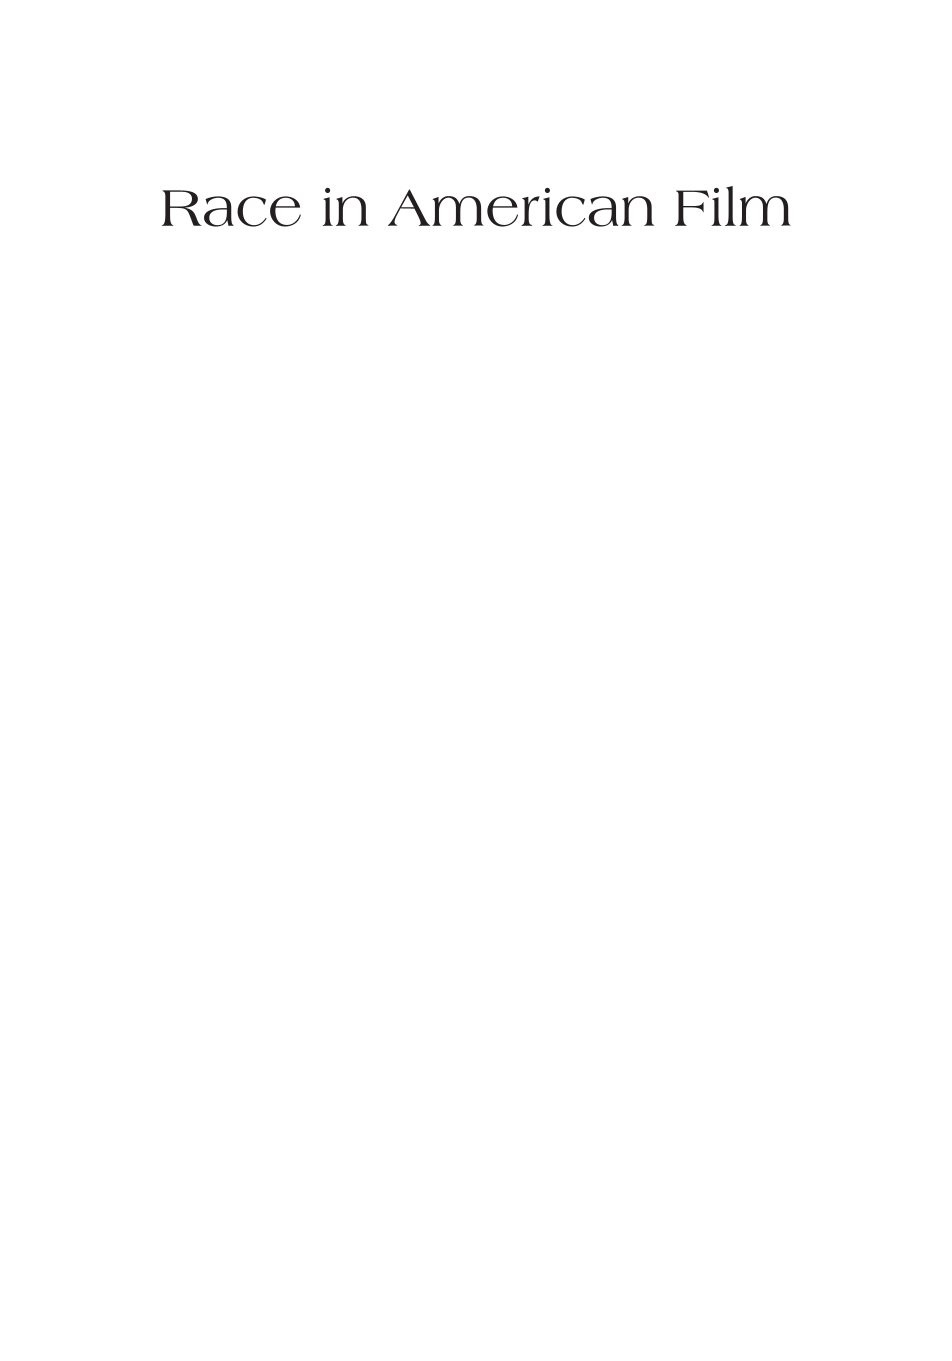 Race in American Film: Voices and Visions that Shaped a Nation [3 volumes] page i